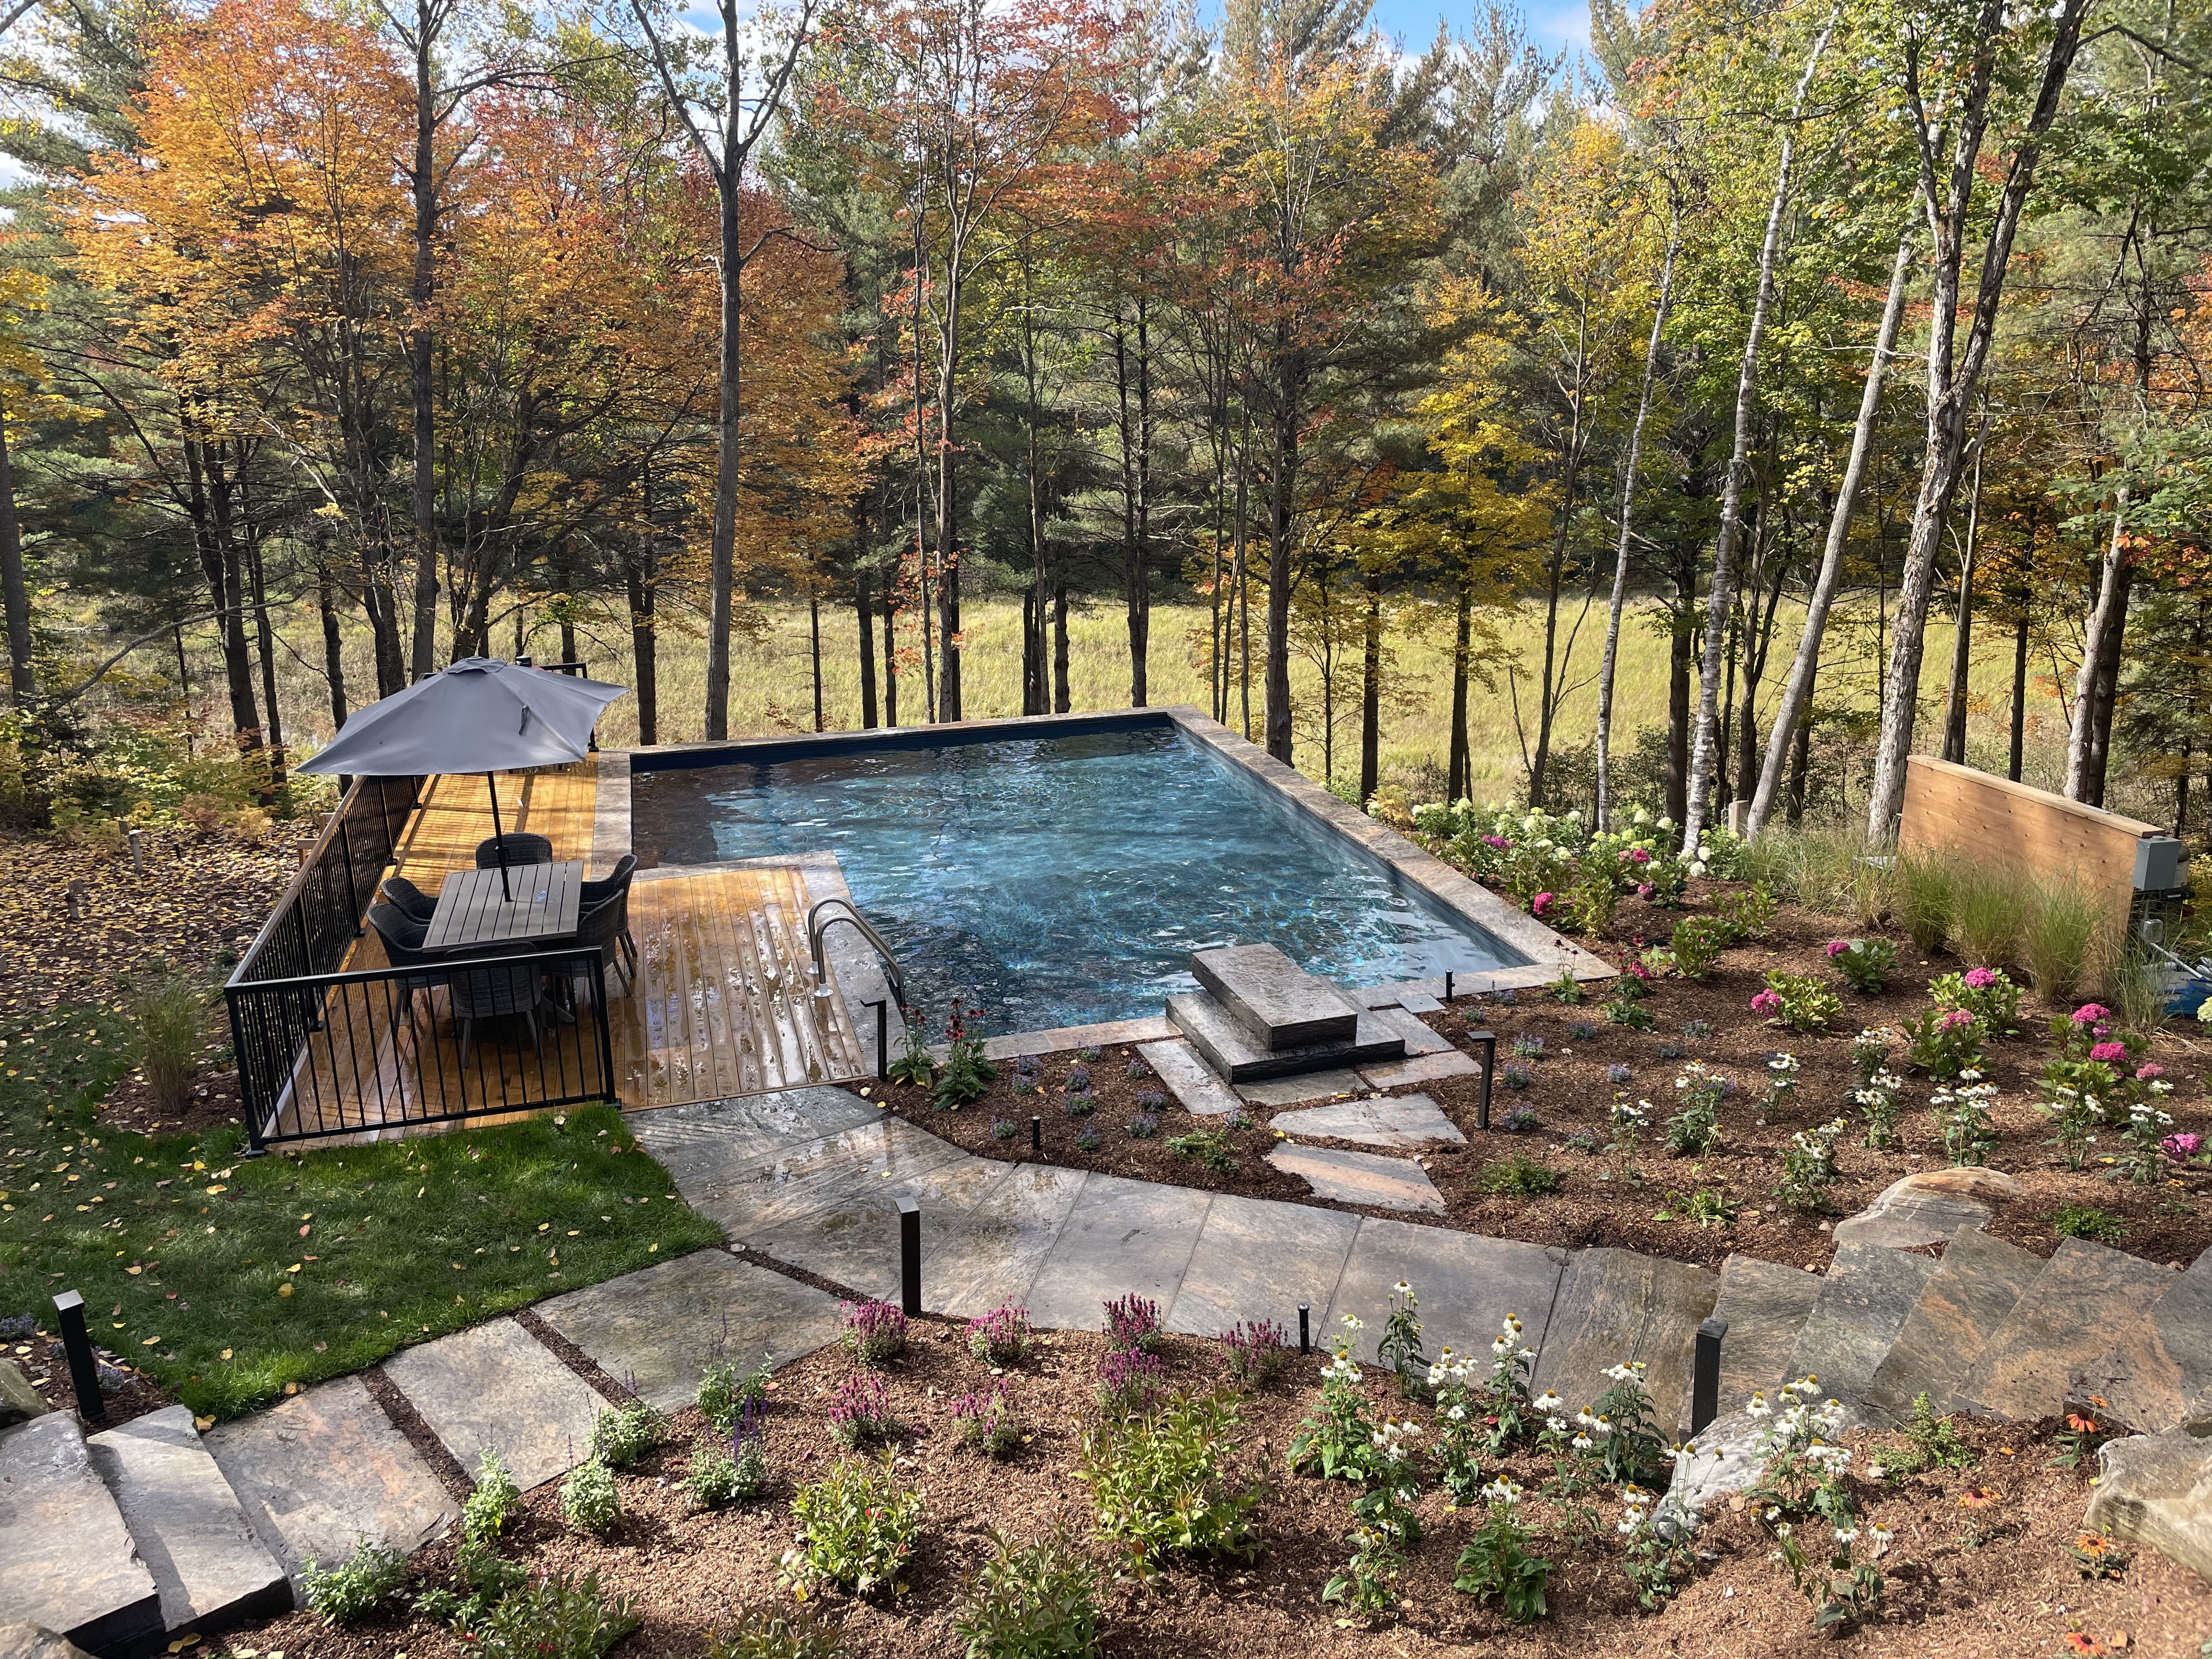 Completed in-ground pool in a wooded area.